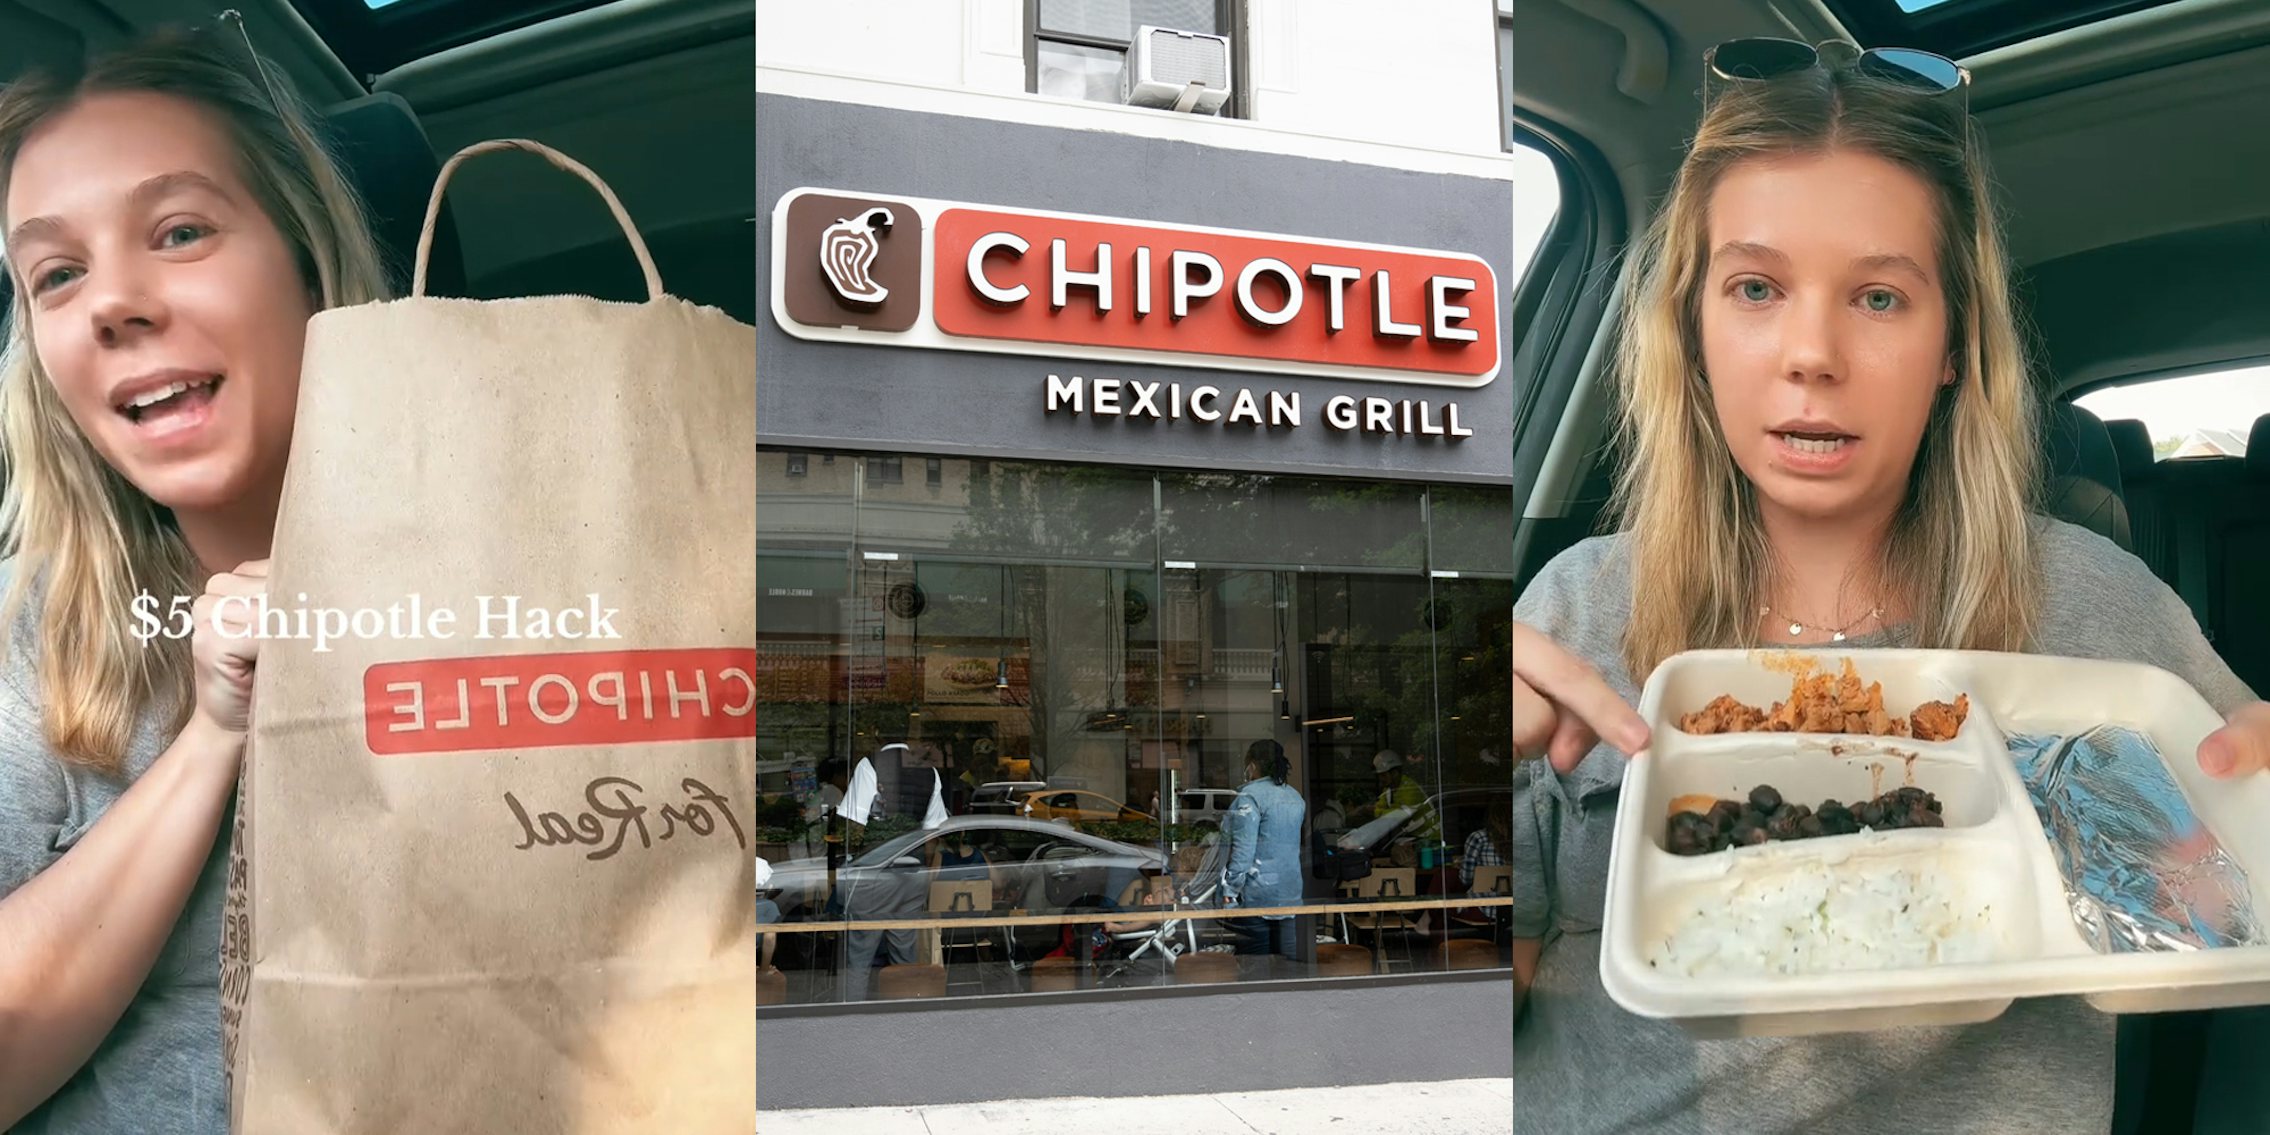 Chipotle customer speaking in car with food in bag with caption '$5 Chipotle Hack' (l) Chipotle building with sign (c) Chipotle customer speaking in car with food (r)